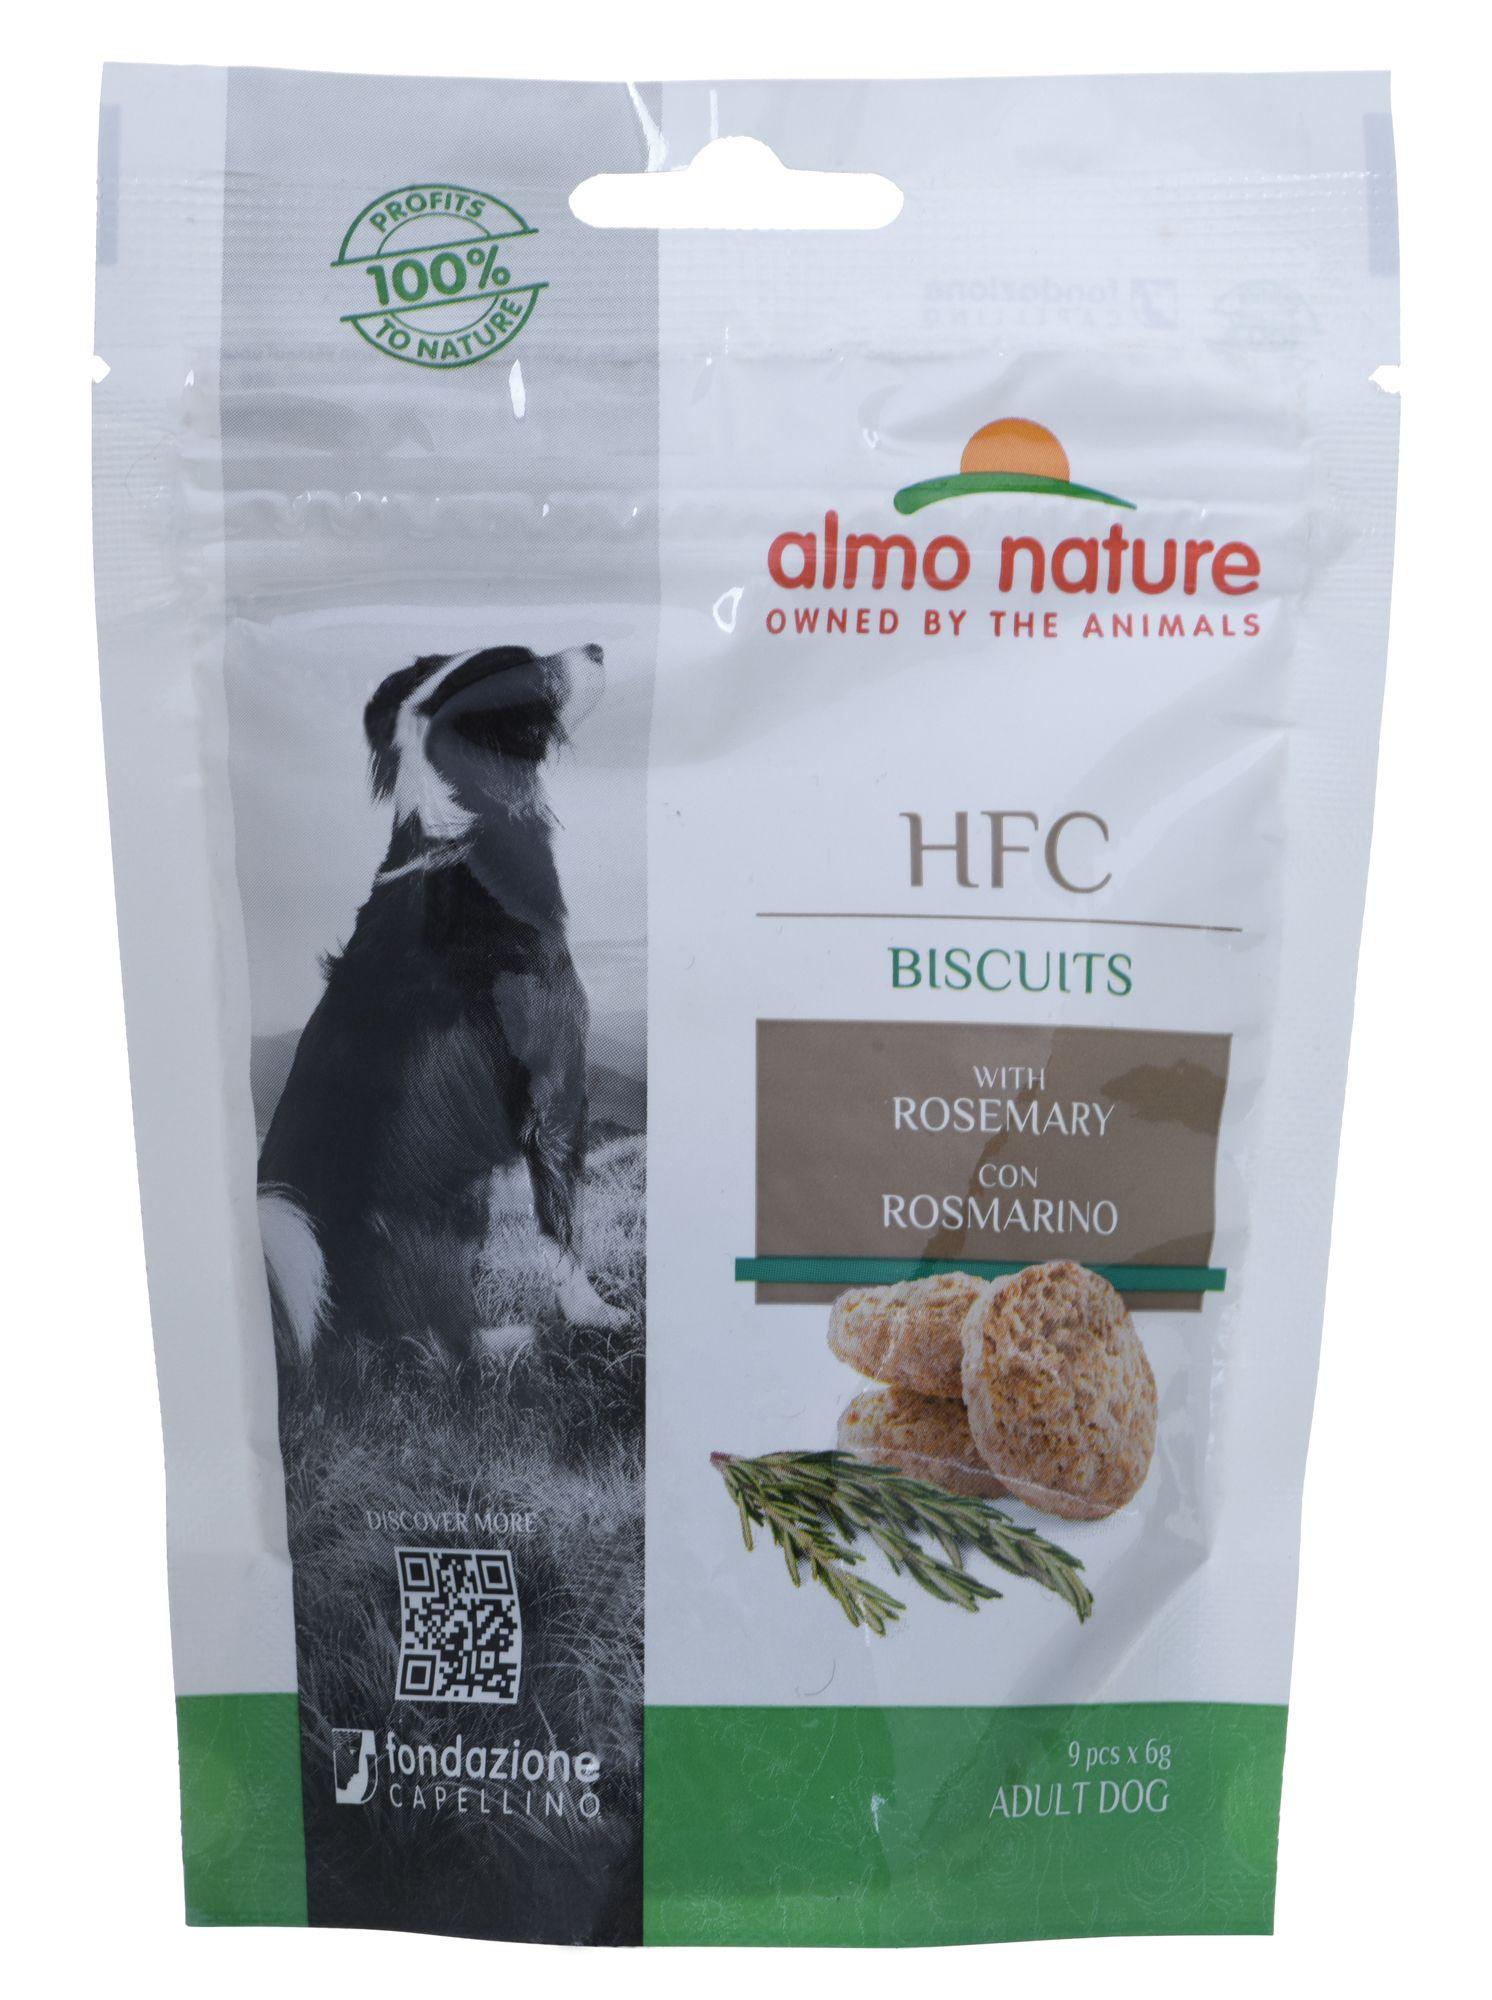 ALMO NATURE HFC Biscuits Rosemary - Rosemary Biscuits for Dogs - 54 g